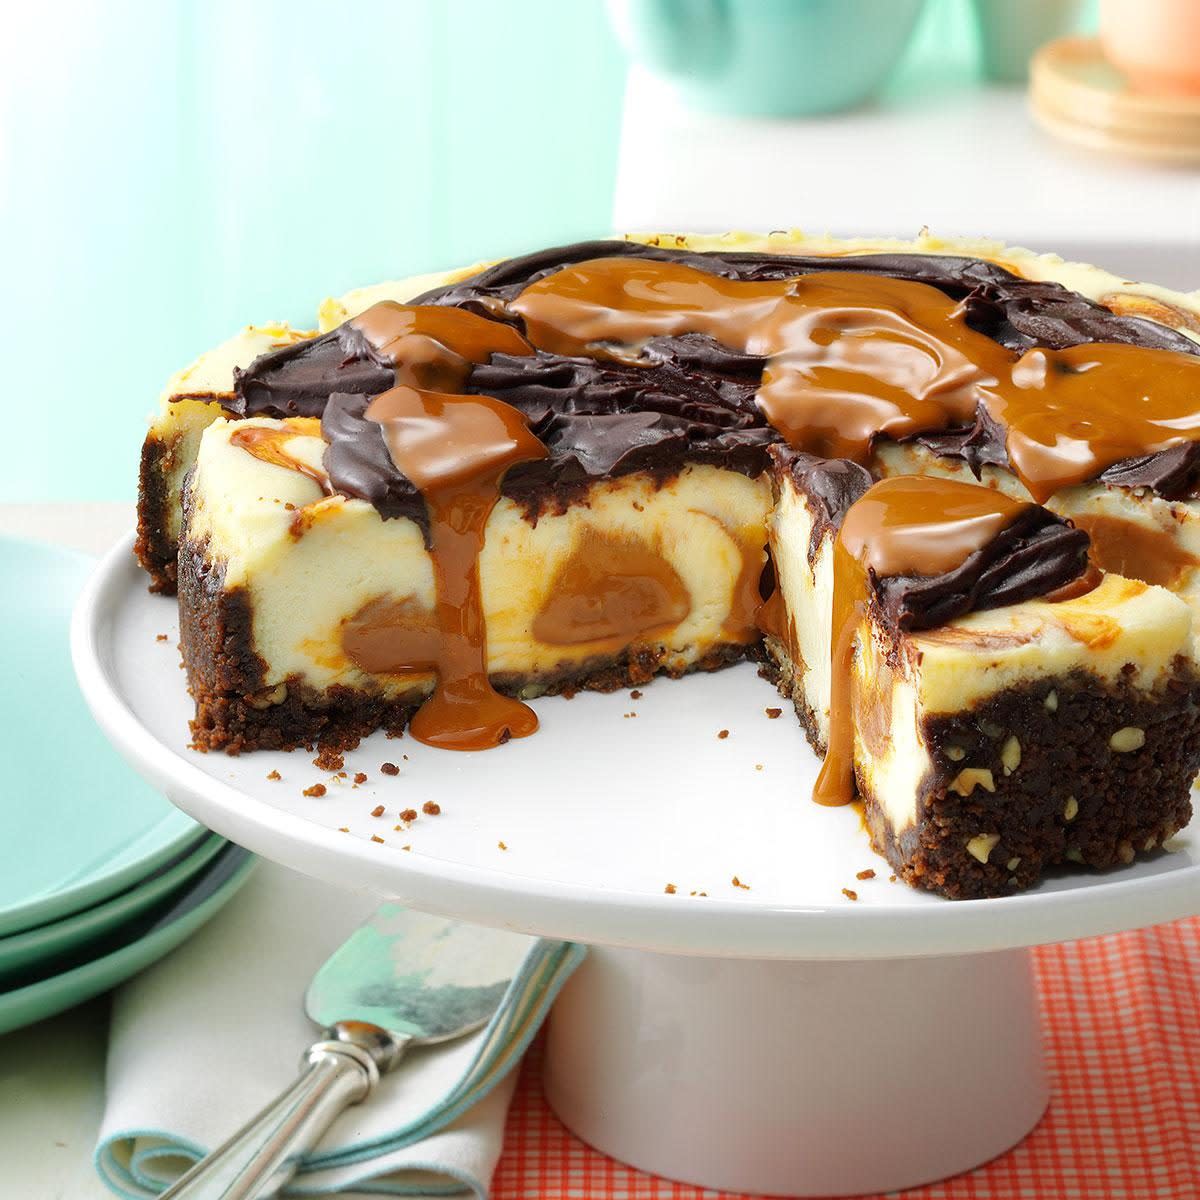 Inspired by: Cheesecake Factory Dulce De Leche Cheesecake